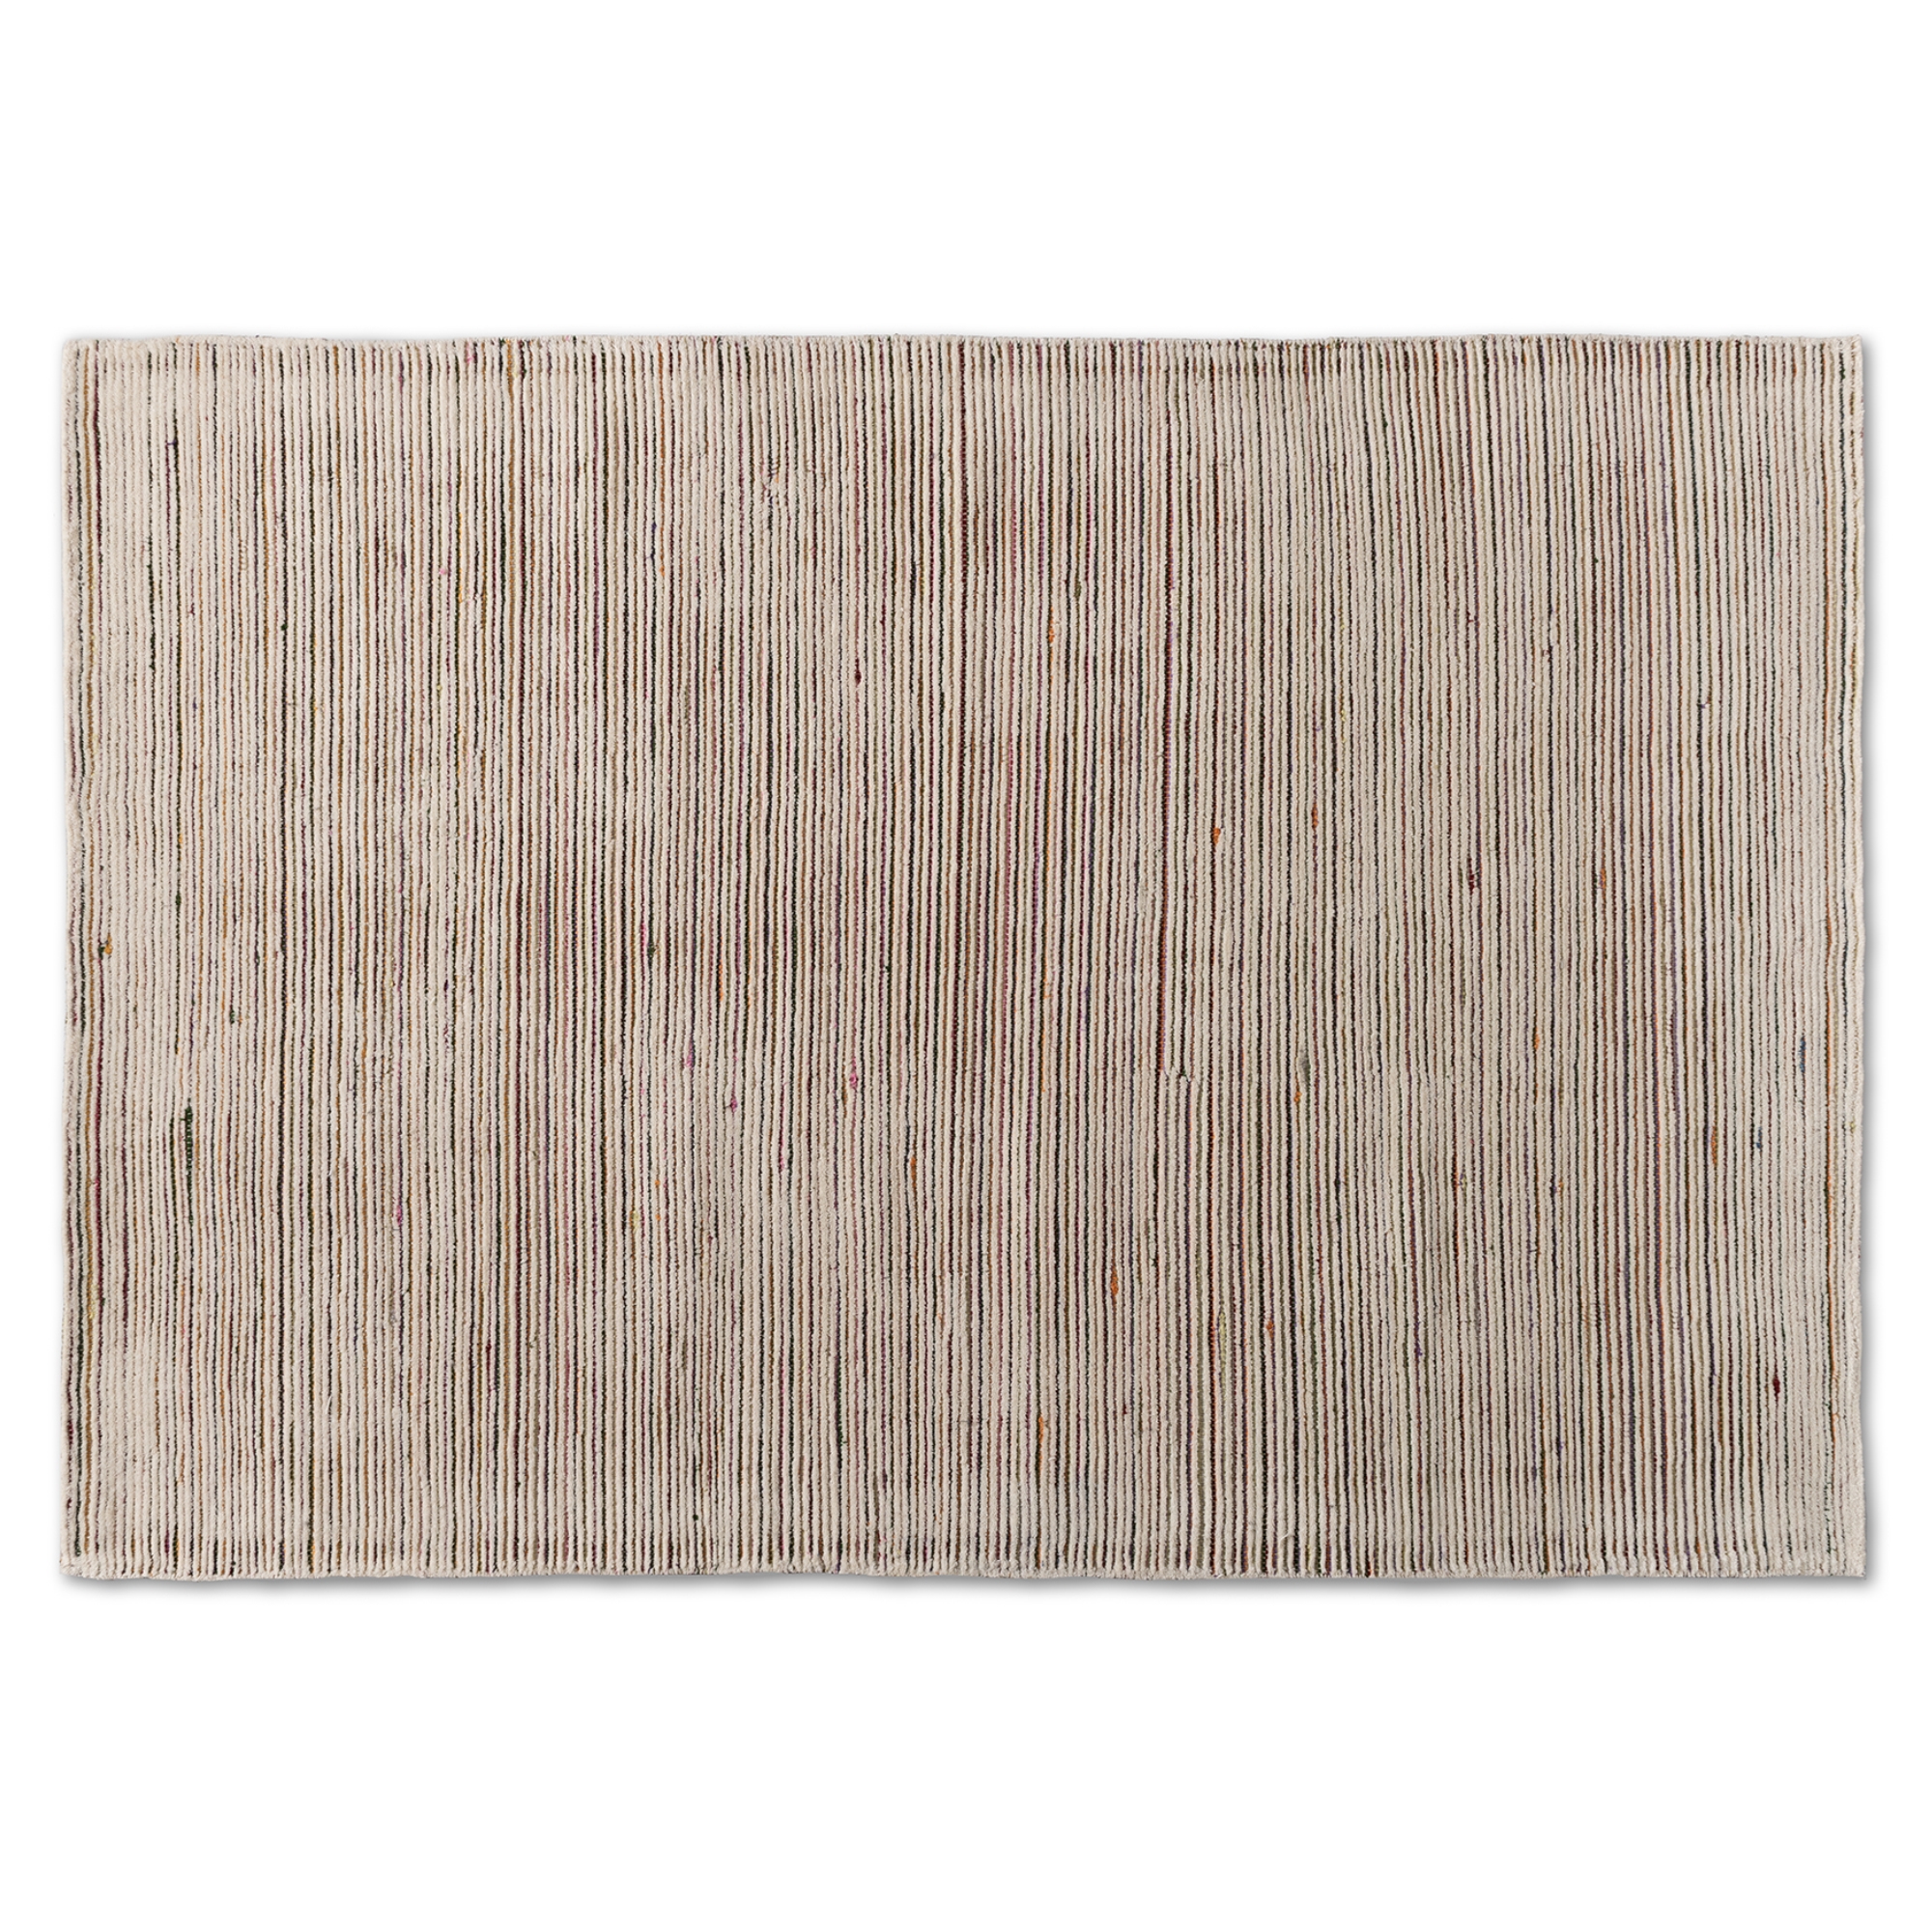 Baxton Studio Finsbury Modern and Contemporary Multi-Colored Hand-Tufted Wool Blend Area Rug